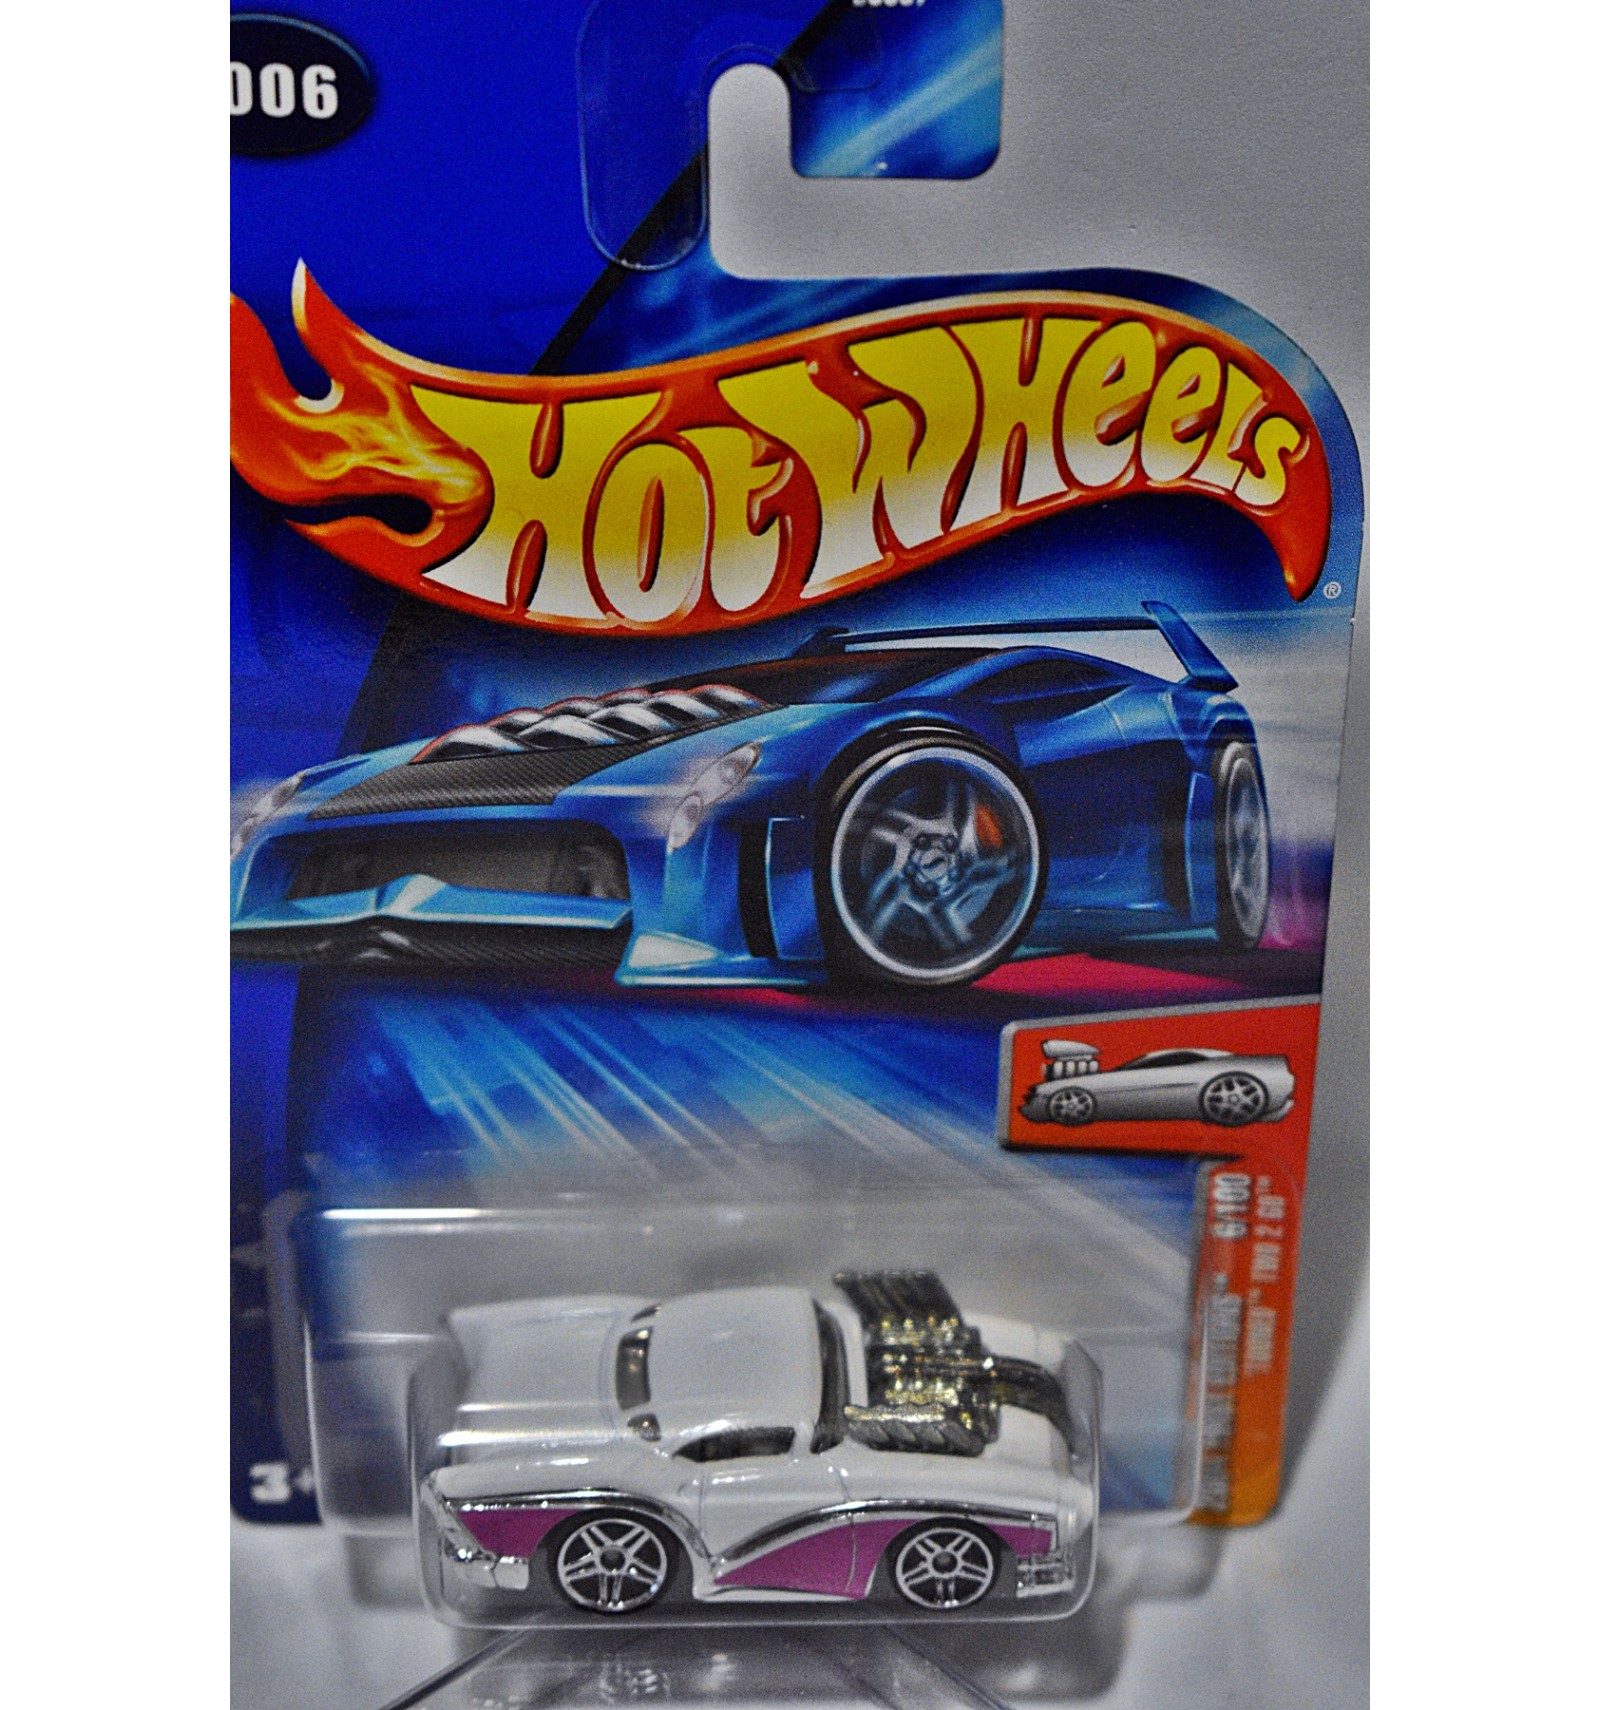 Hot Wheels 1:64 First Editions Tooned Chevy Impala for sale online